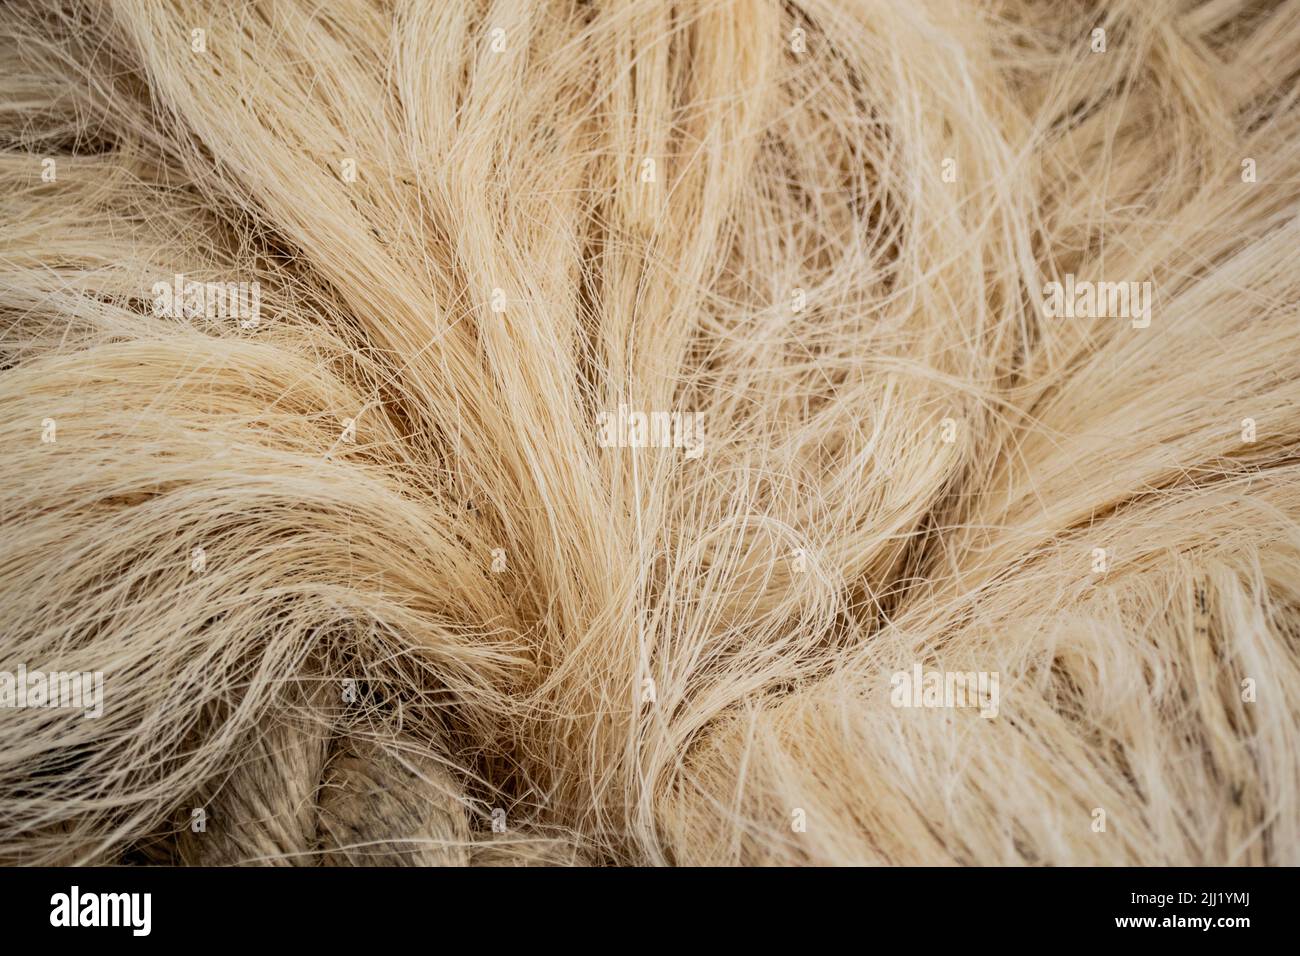 Close-up of a white sisal fiber, part of which is woven into a rope. Stock Photo